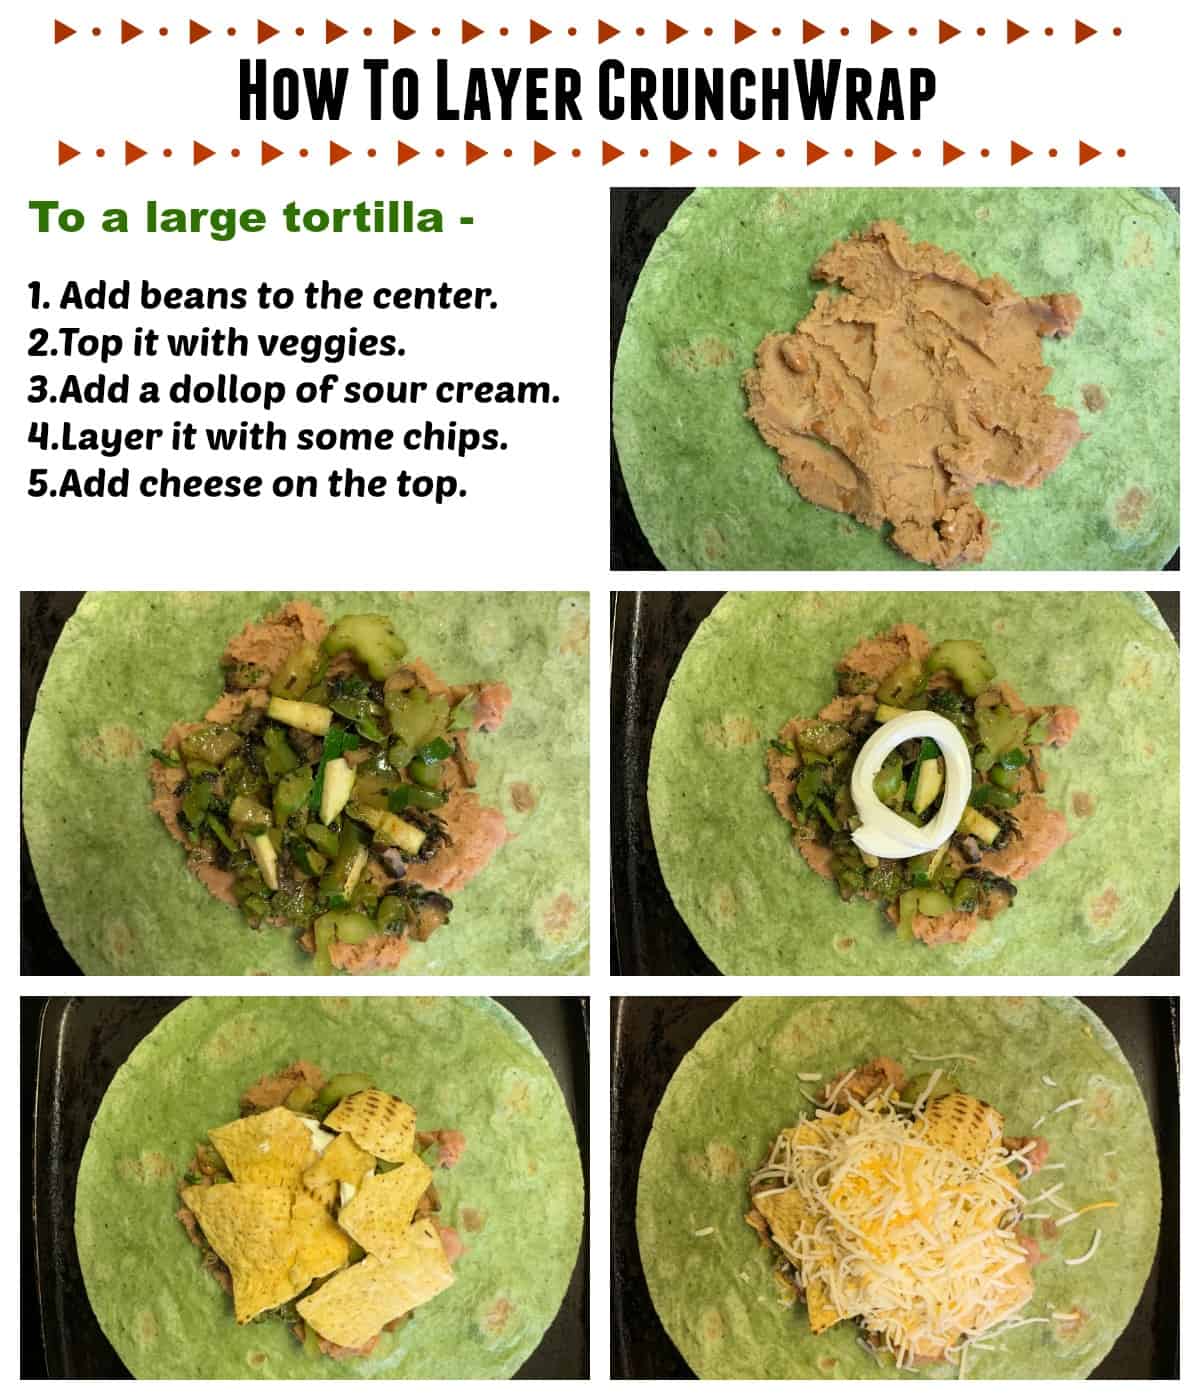 Layering the tortilla with beans and veggies 